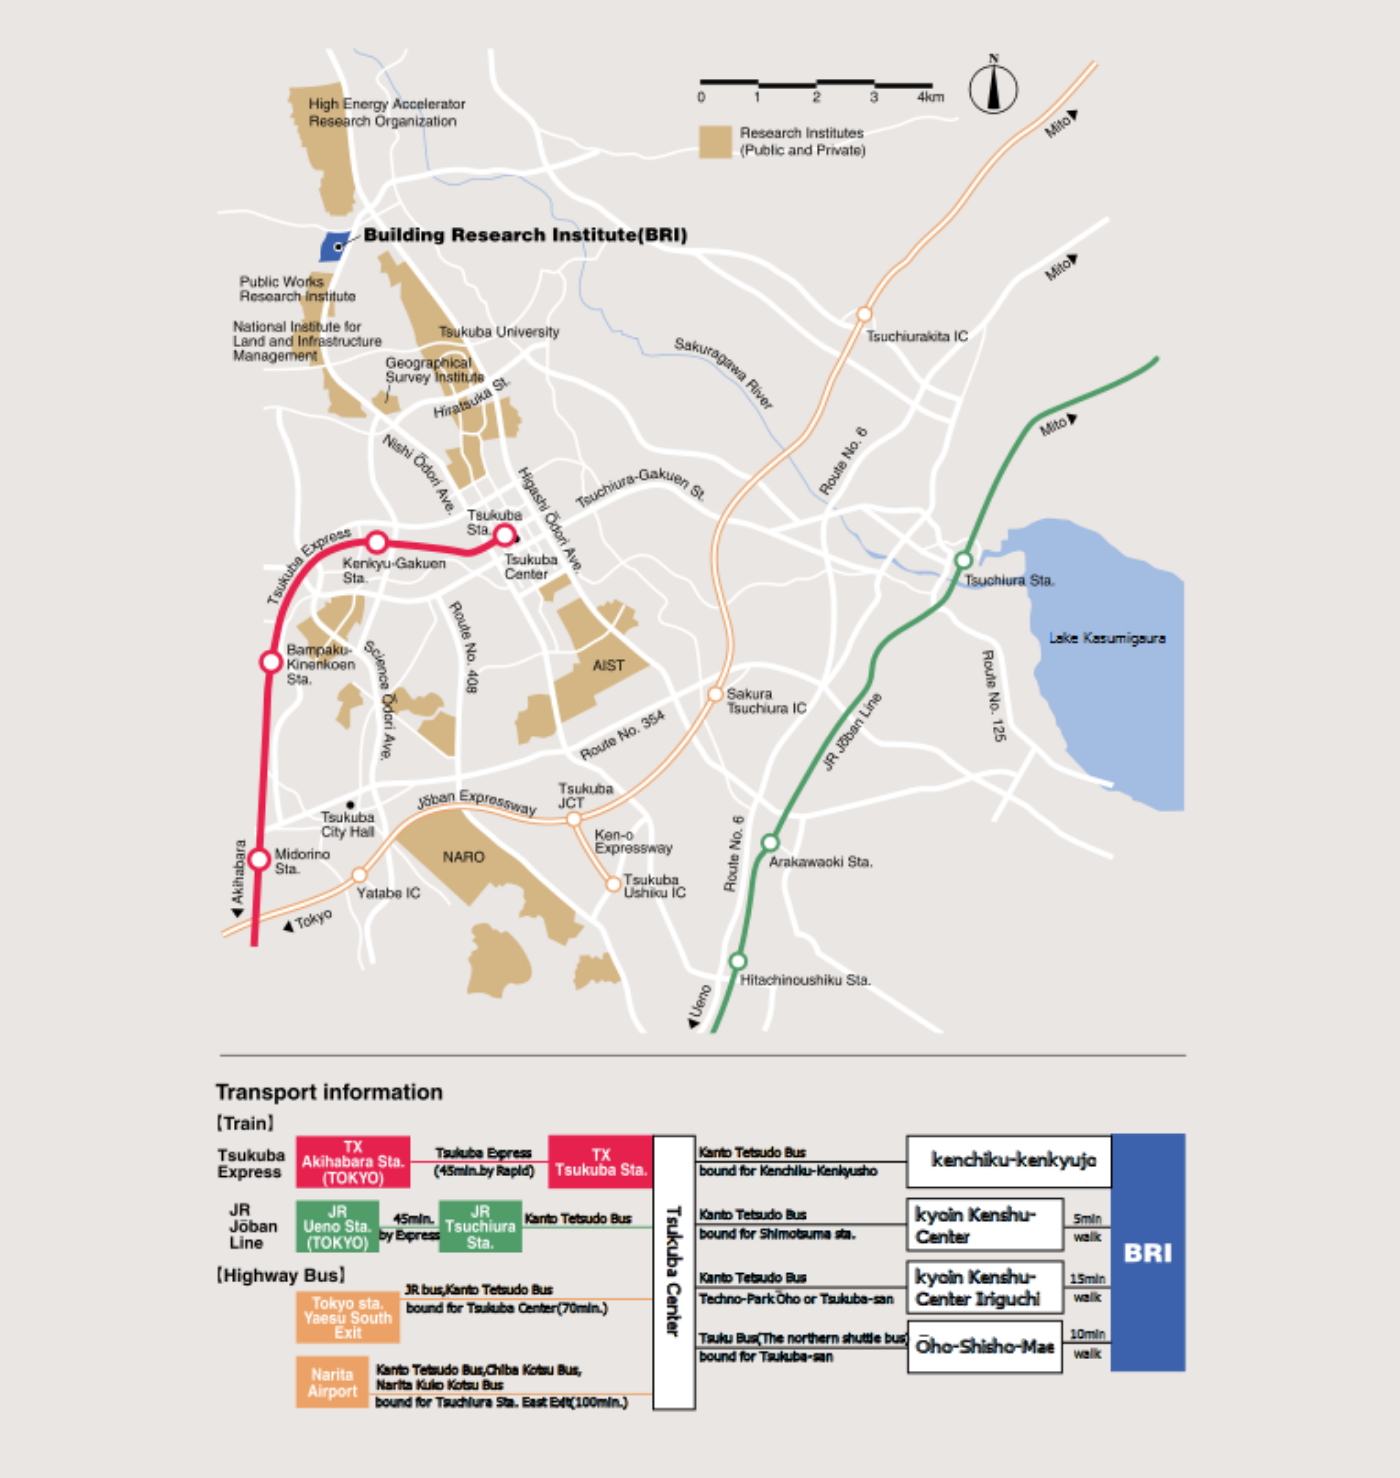 access MAP 2 image